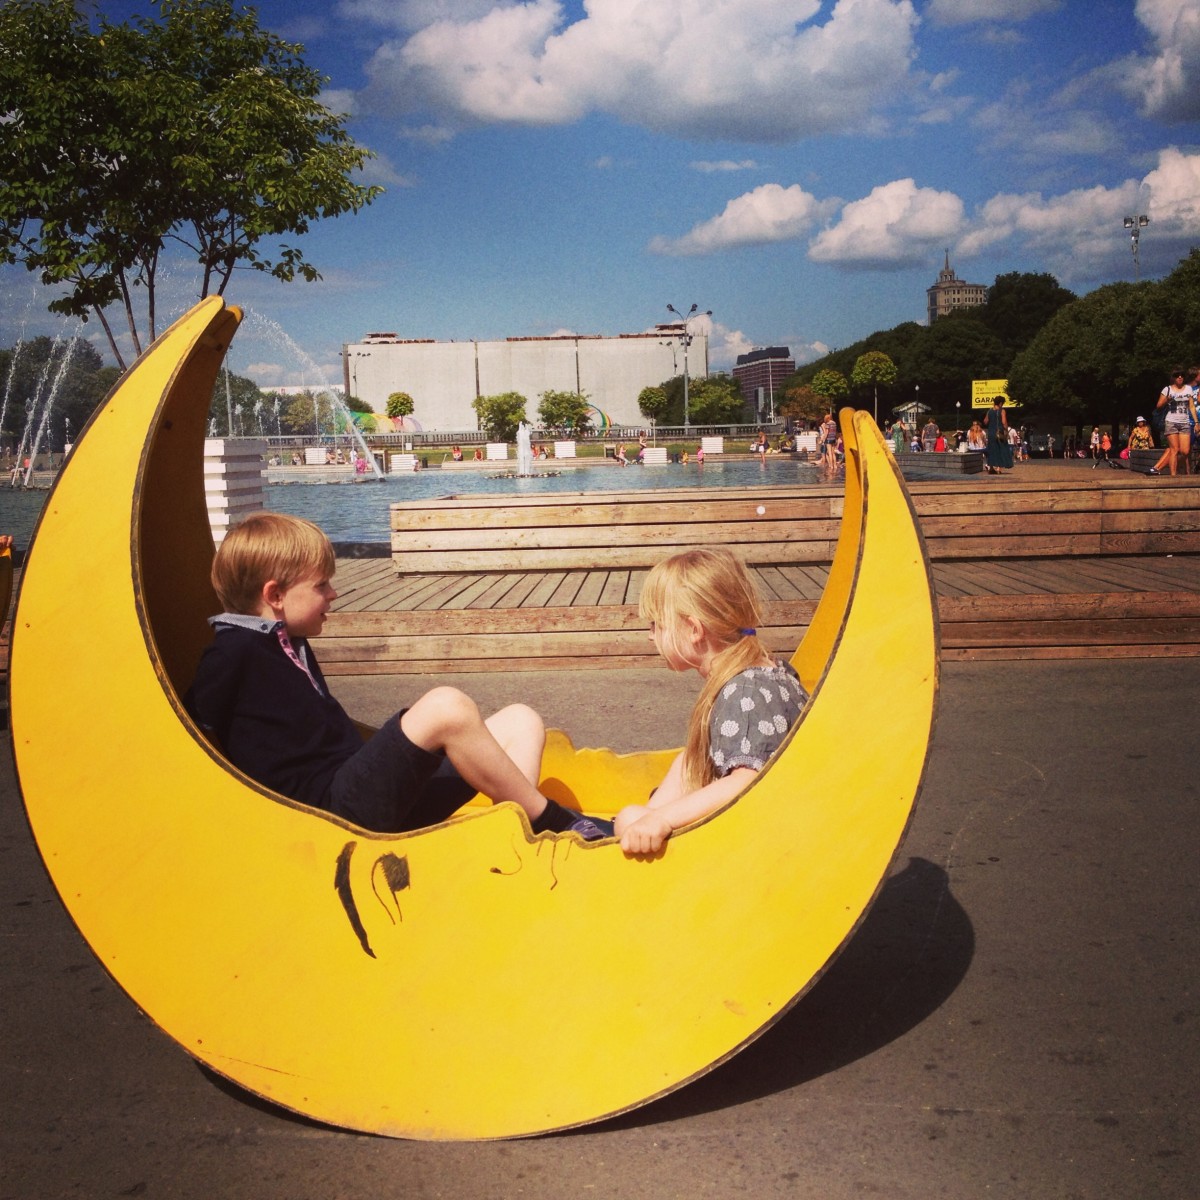 Gorky Park, Moscow, Russia - Copyright: www.globalmousetravels.com